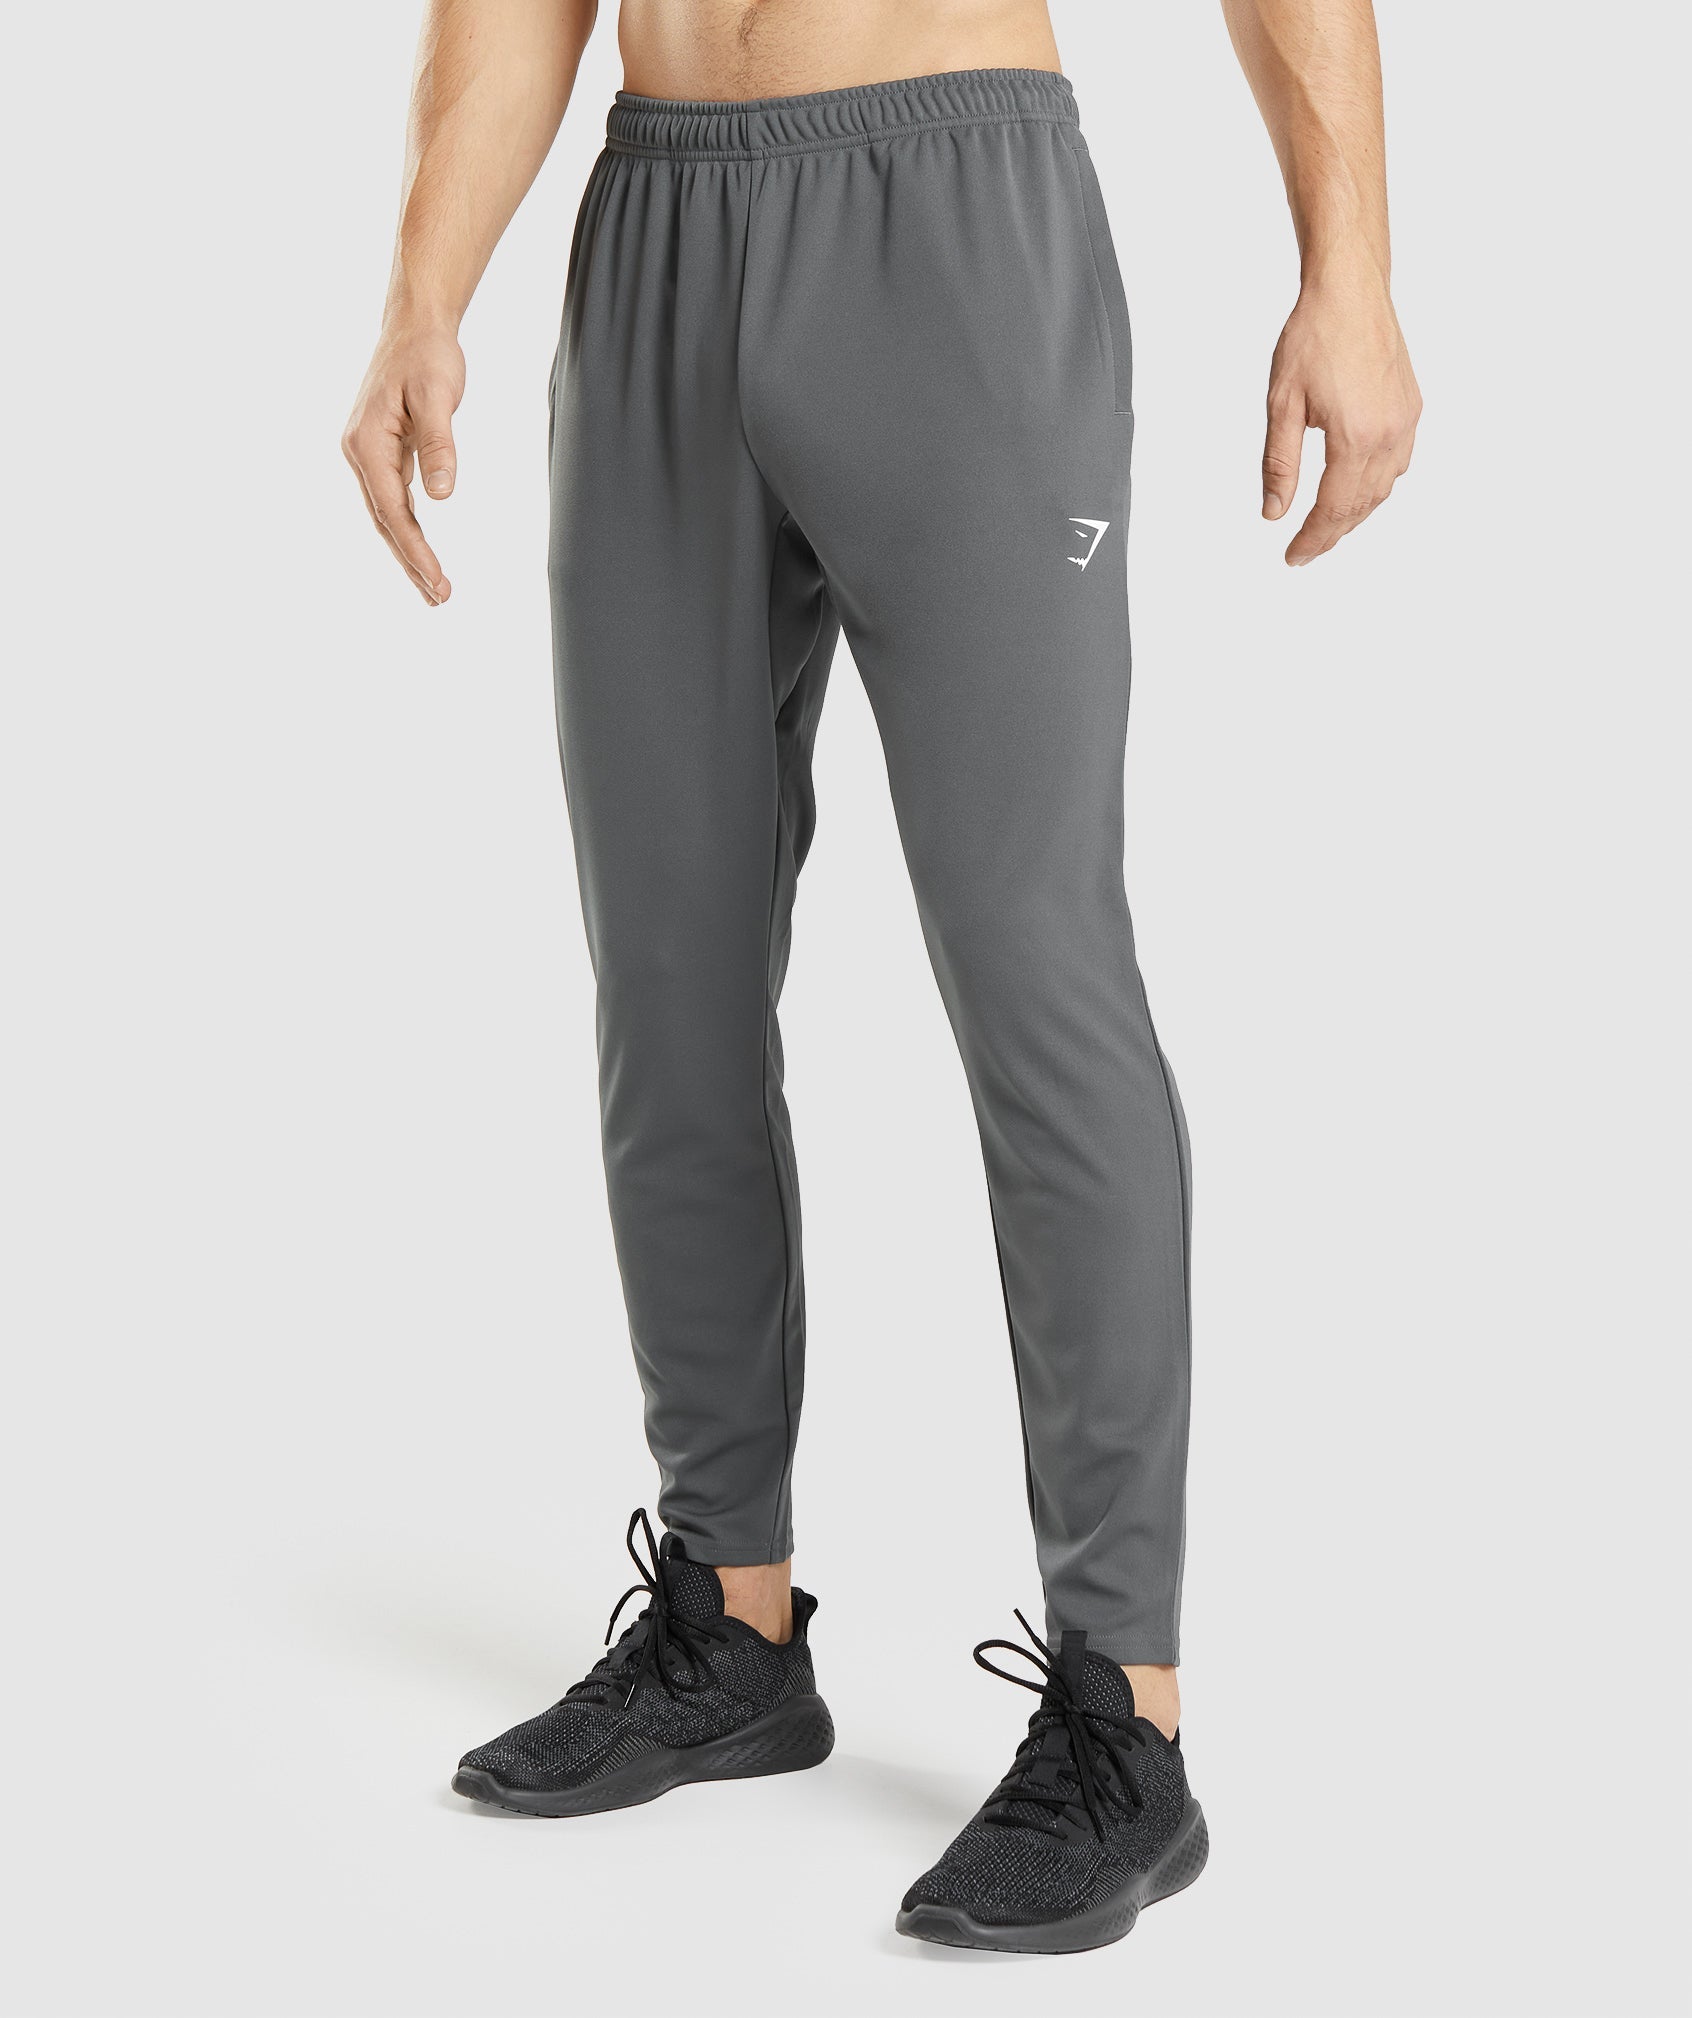 Arrival Knit Joggers in Charcoal Grey is out of stock